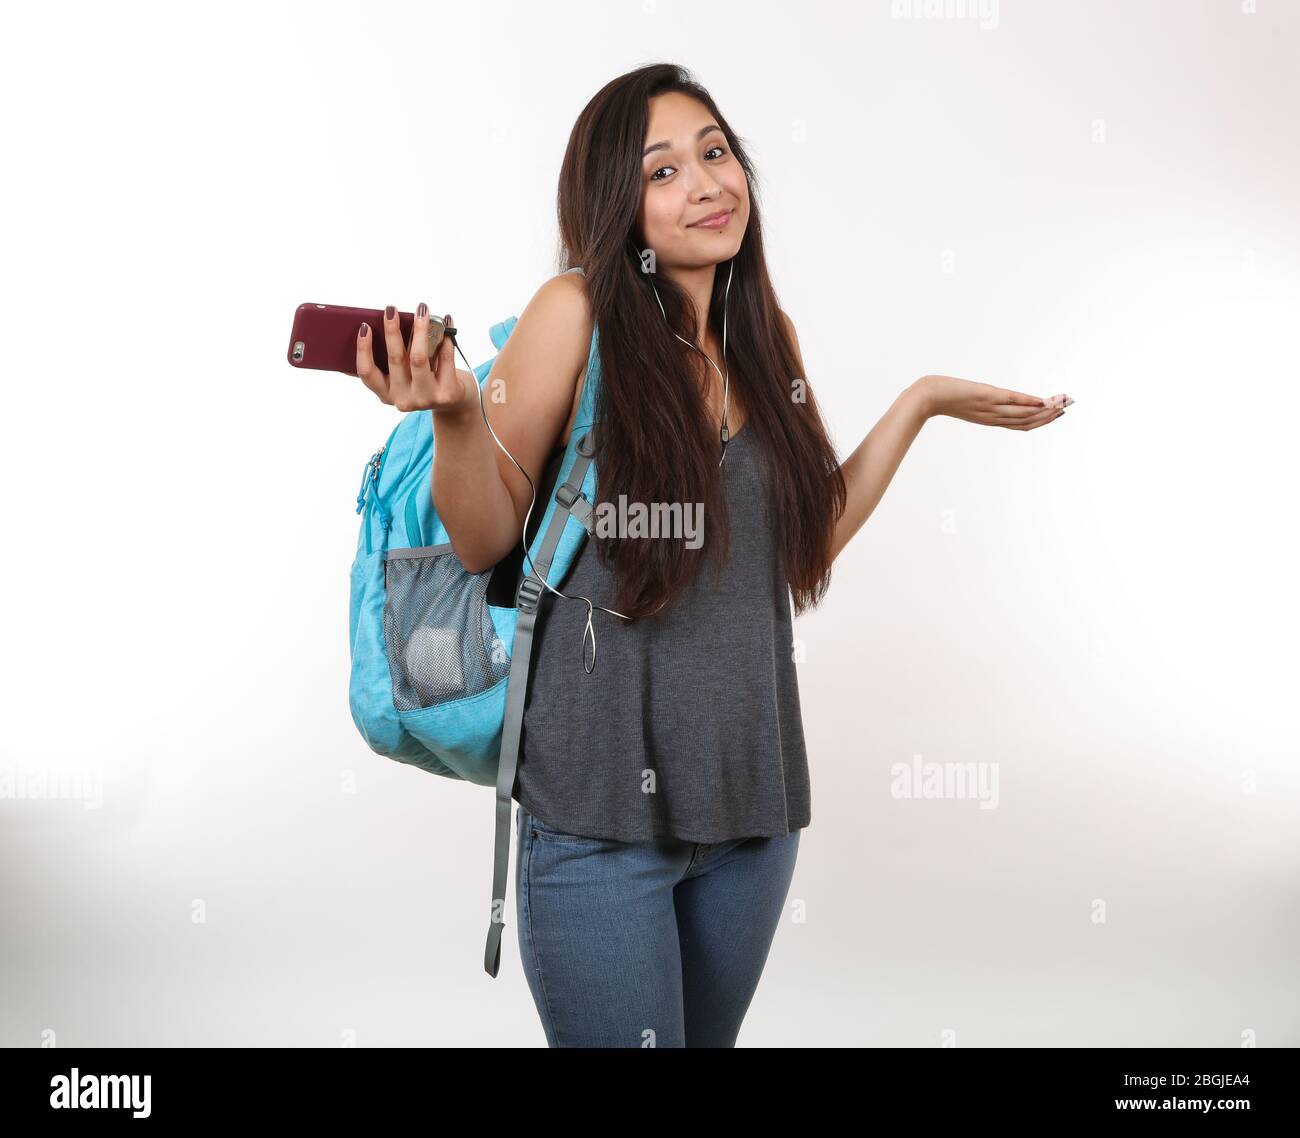 A young latina student wearing a blue backpack, holding her phone shrugs her shoulders.  Listening to music. Stock Photo